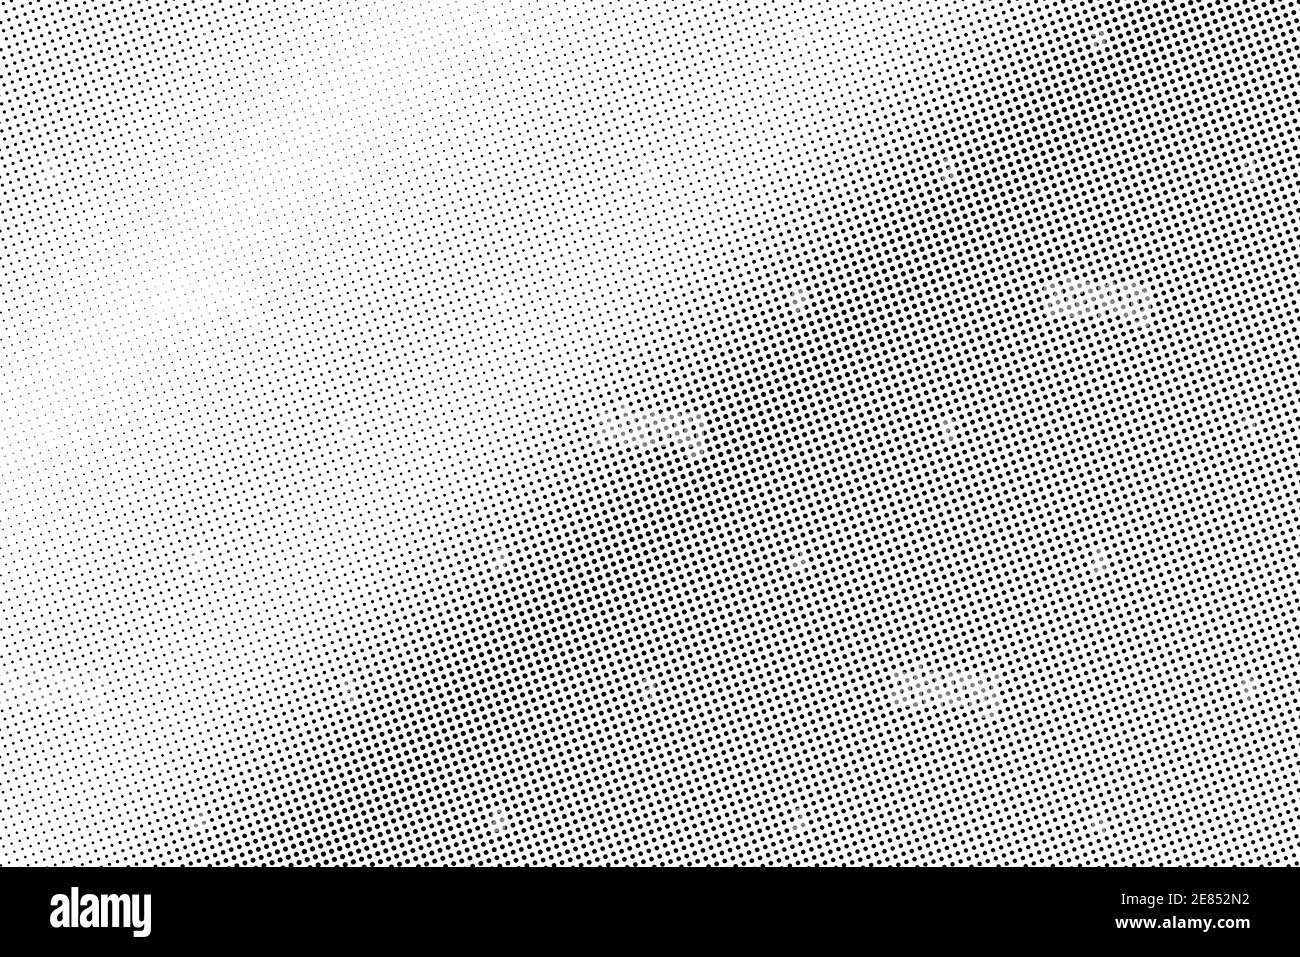 Black and white vector halftone. Subtle halftone digital texture. Faded dotted gradient. Comic effect overlay. Retro dot pattern on transparent back. Stock Vector